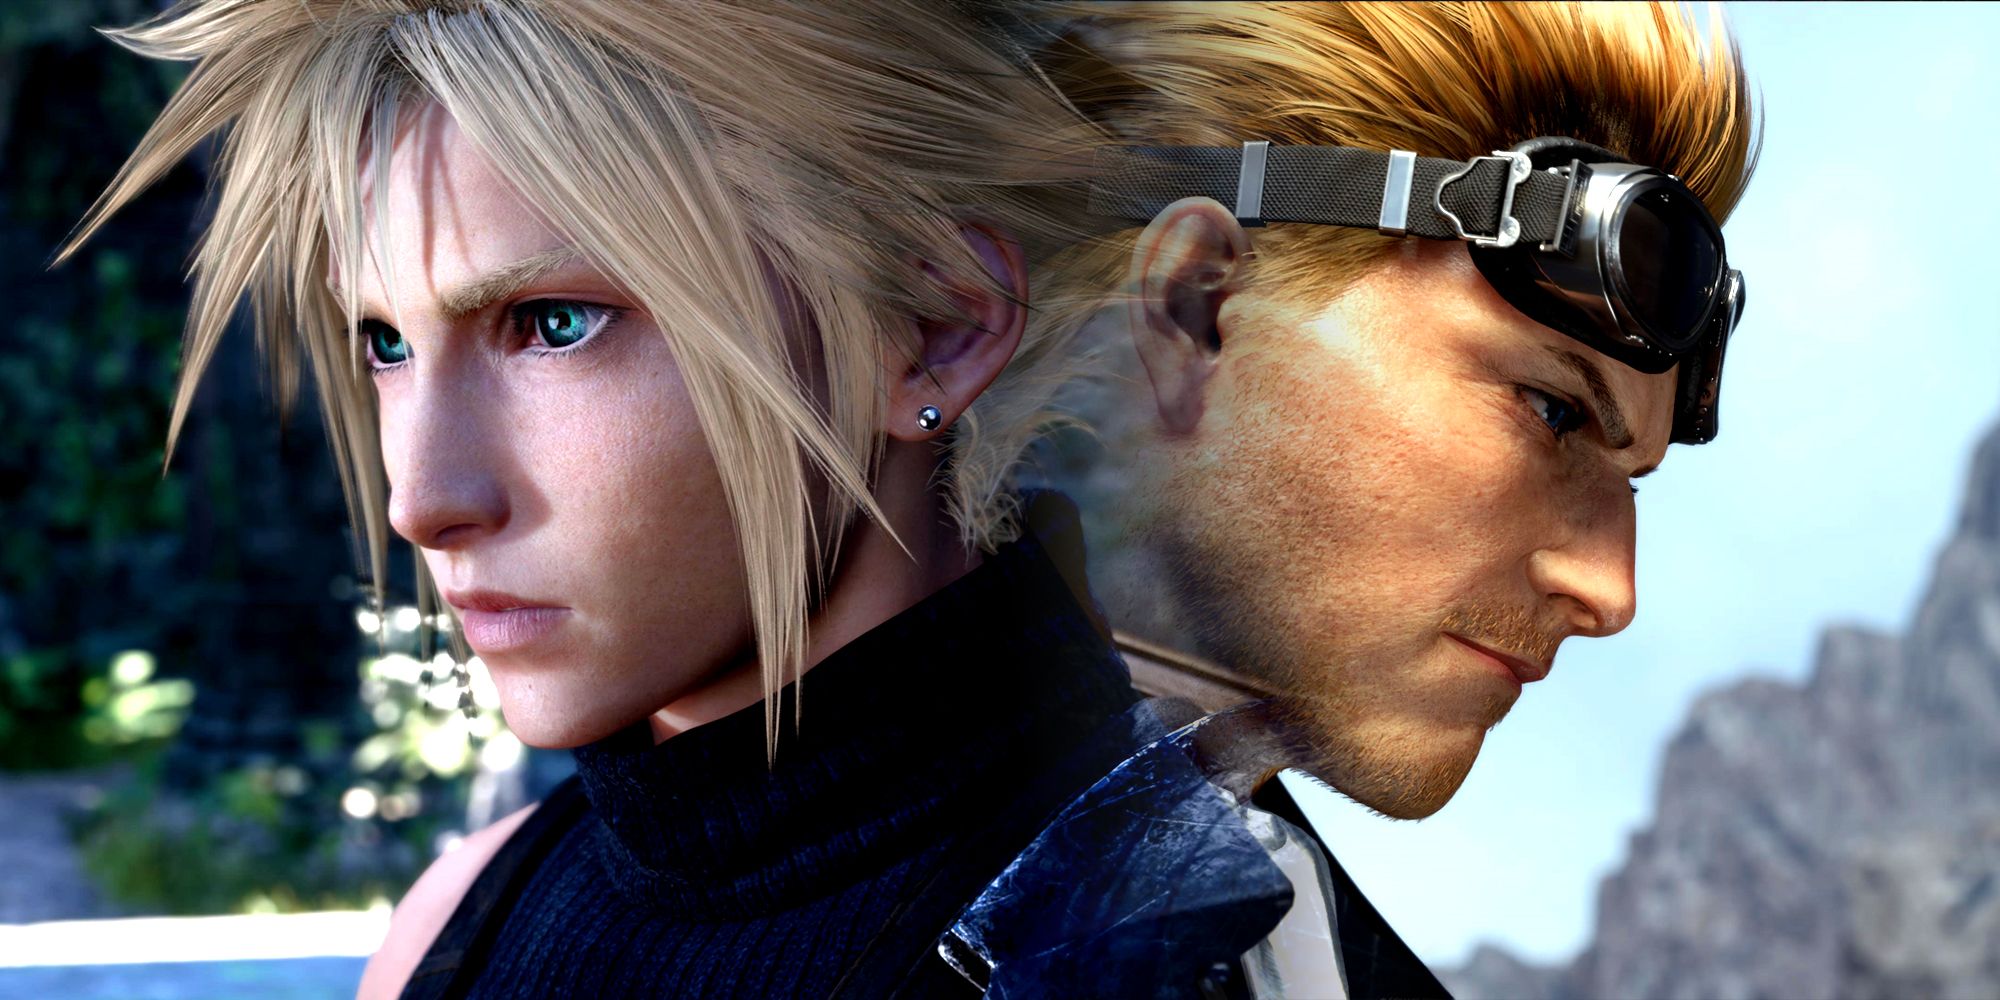 Cloud and Cid looking in opposite directions with intent stares in FF7 REbirth.